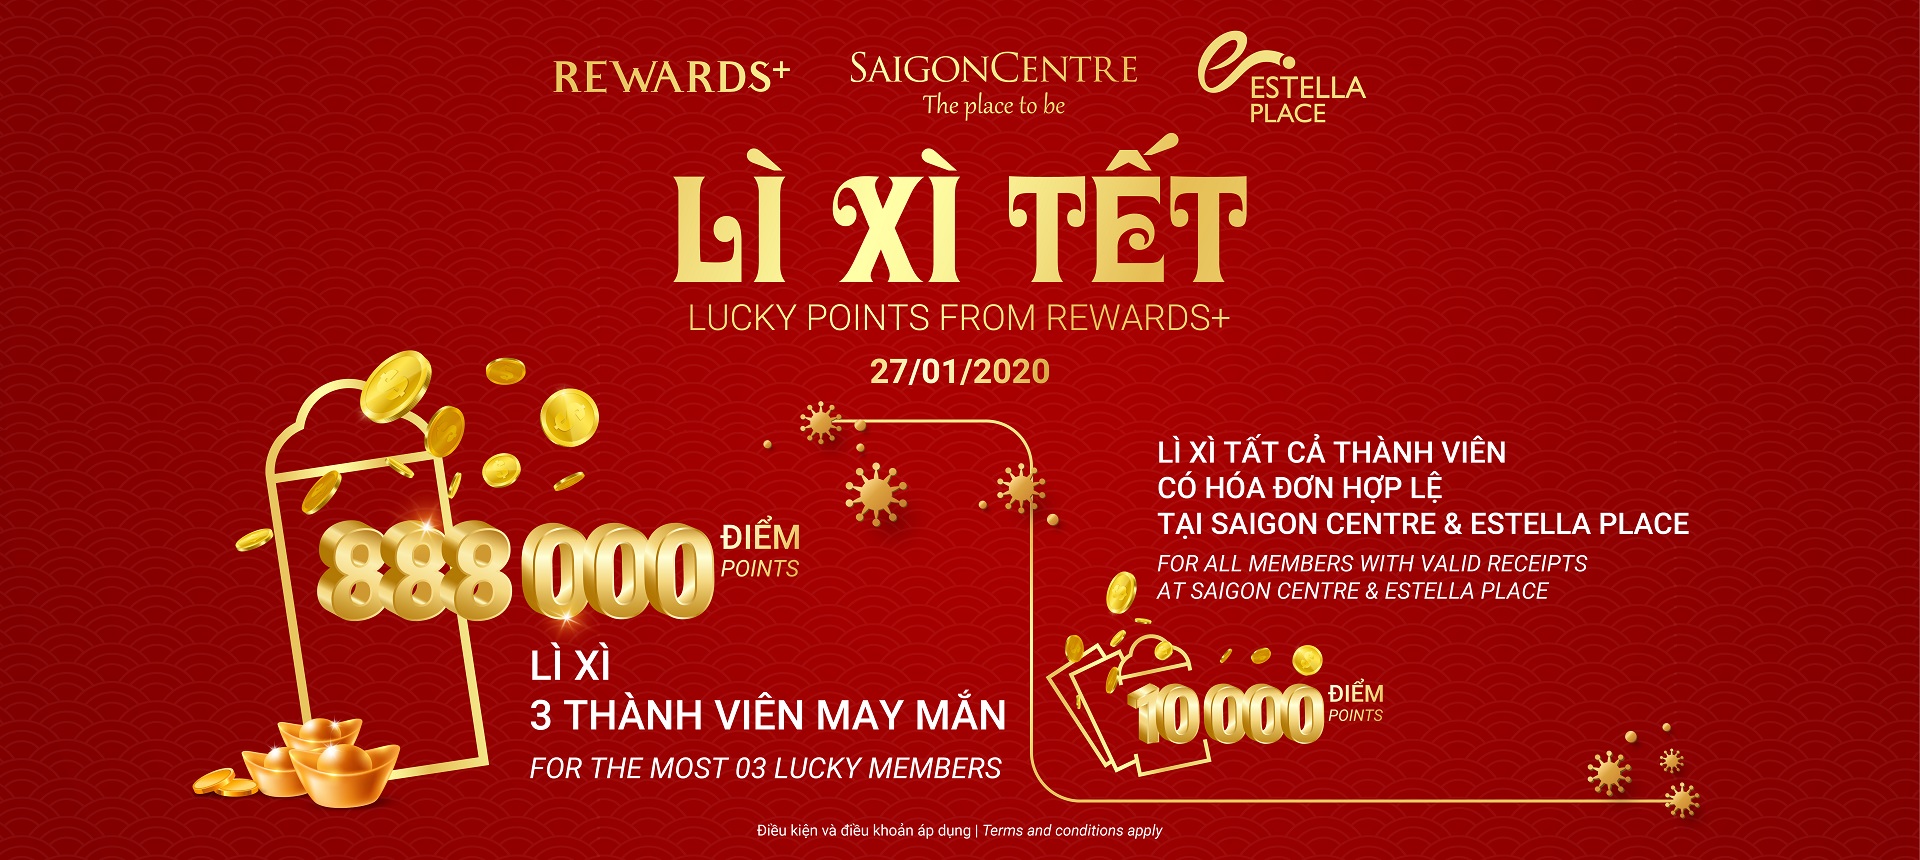 LUCKY POINTS FROM REWARDS+